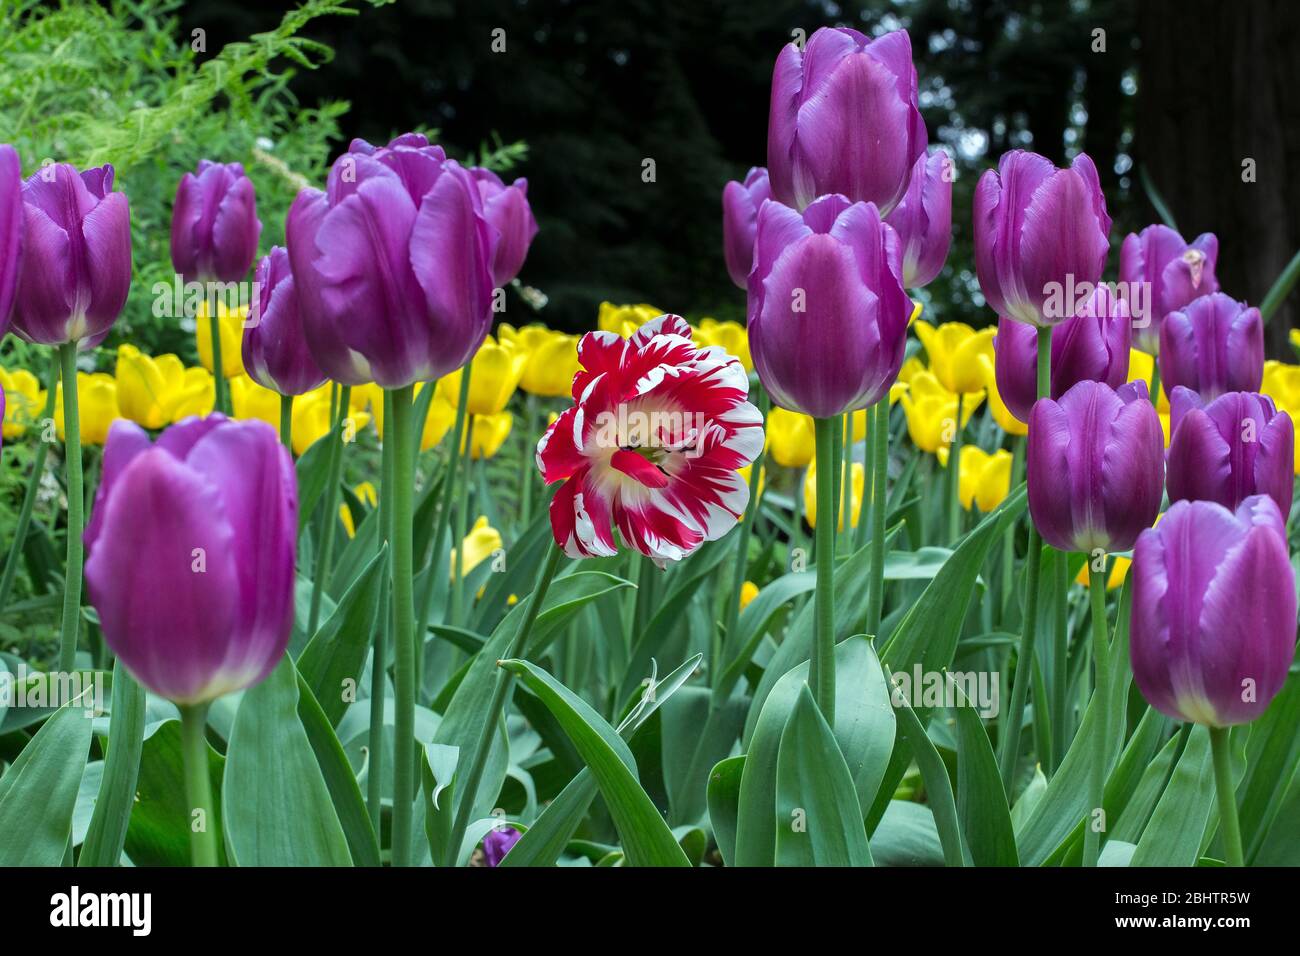 Bright colorful low point of view  photo of a group of purple tulips and one red and white tulip in the middle. Concept of standing out of the crowd. Stock Photo